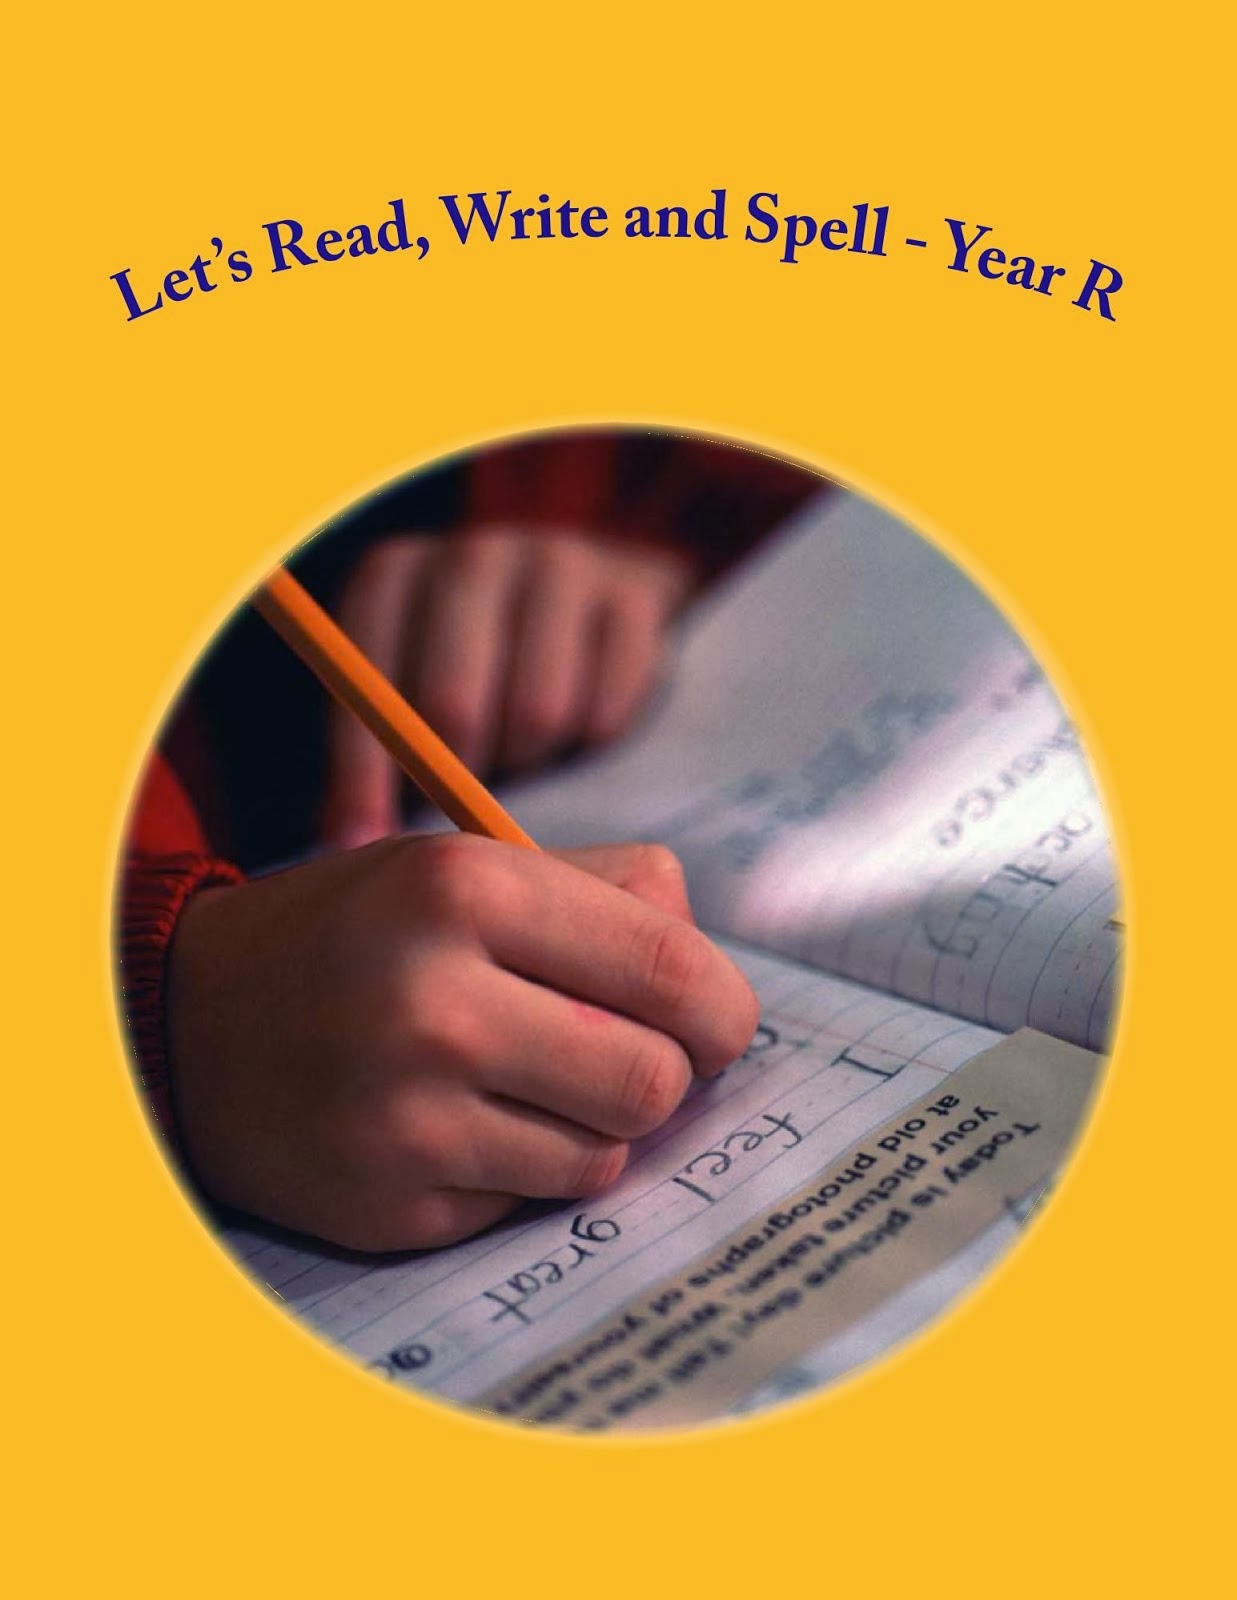 Let's Read Write and Spell